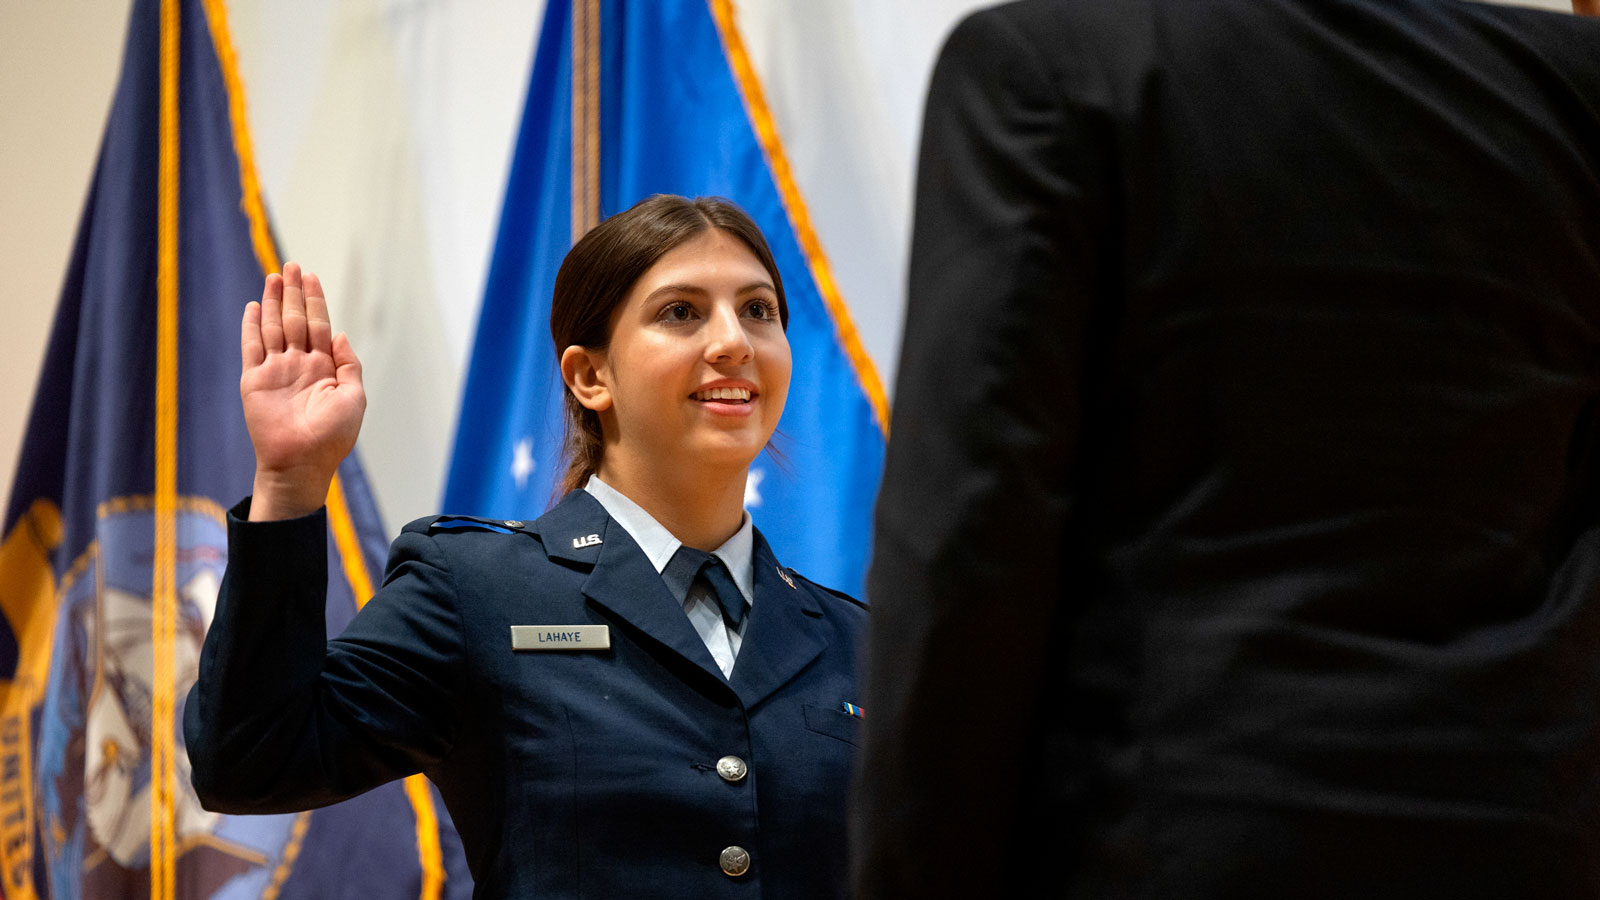 2nd Lt. Isabella LaHaye is sworn in during a commissioning ceremony at Statler Auditorium as part of Commencement 2024 events